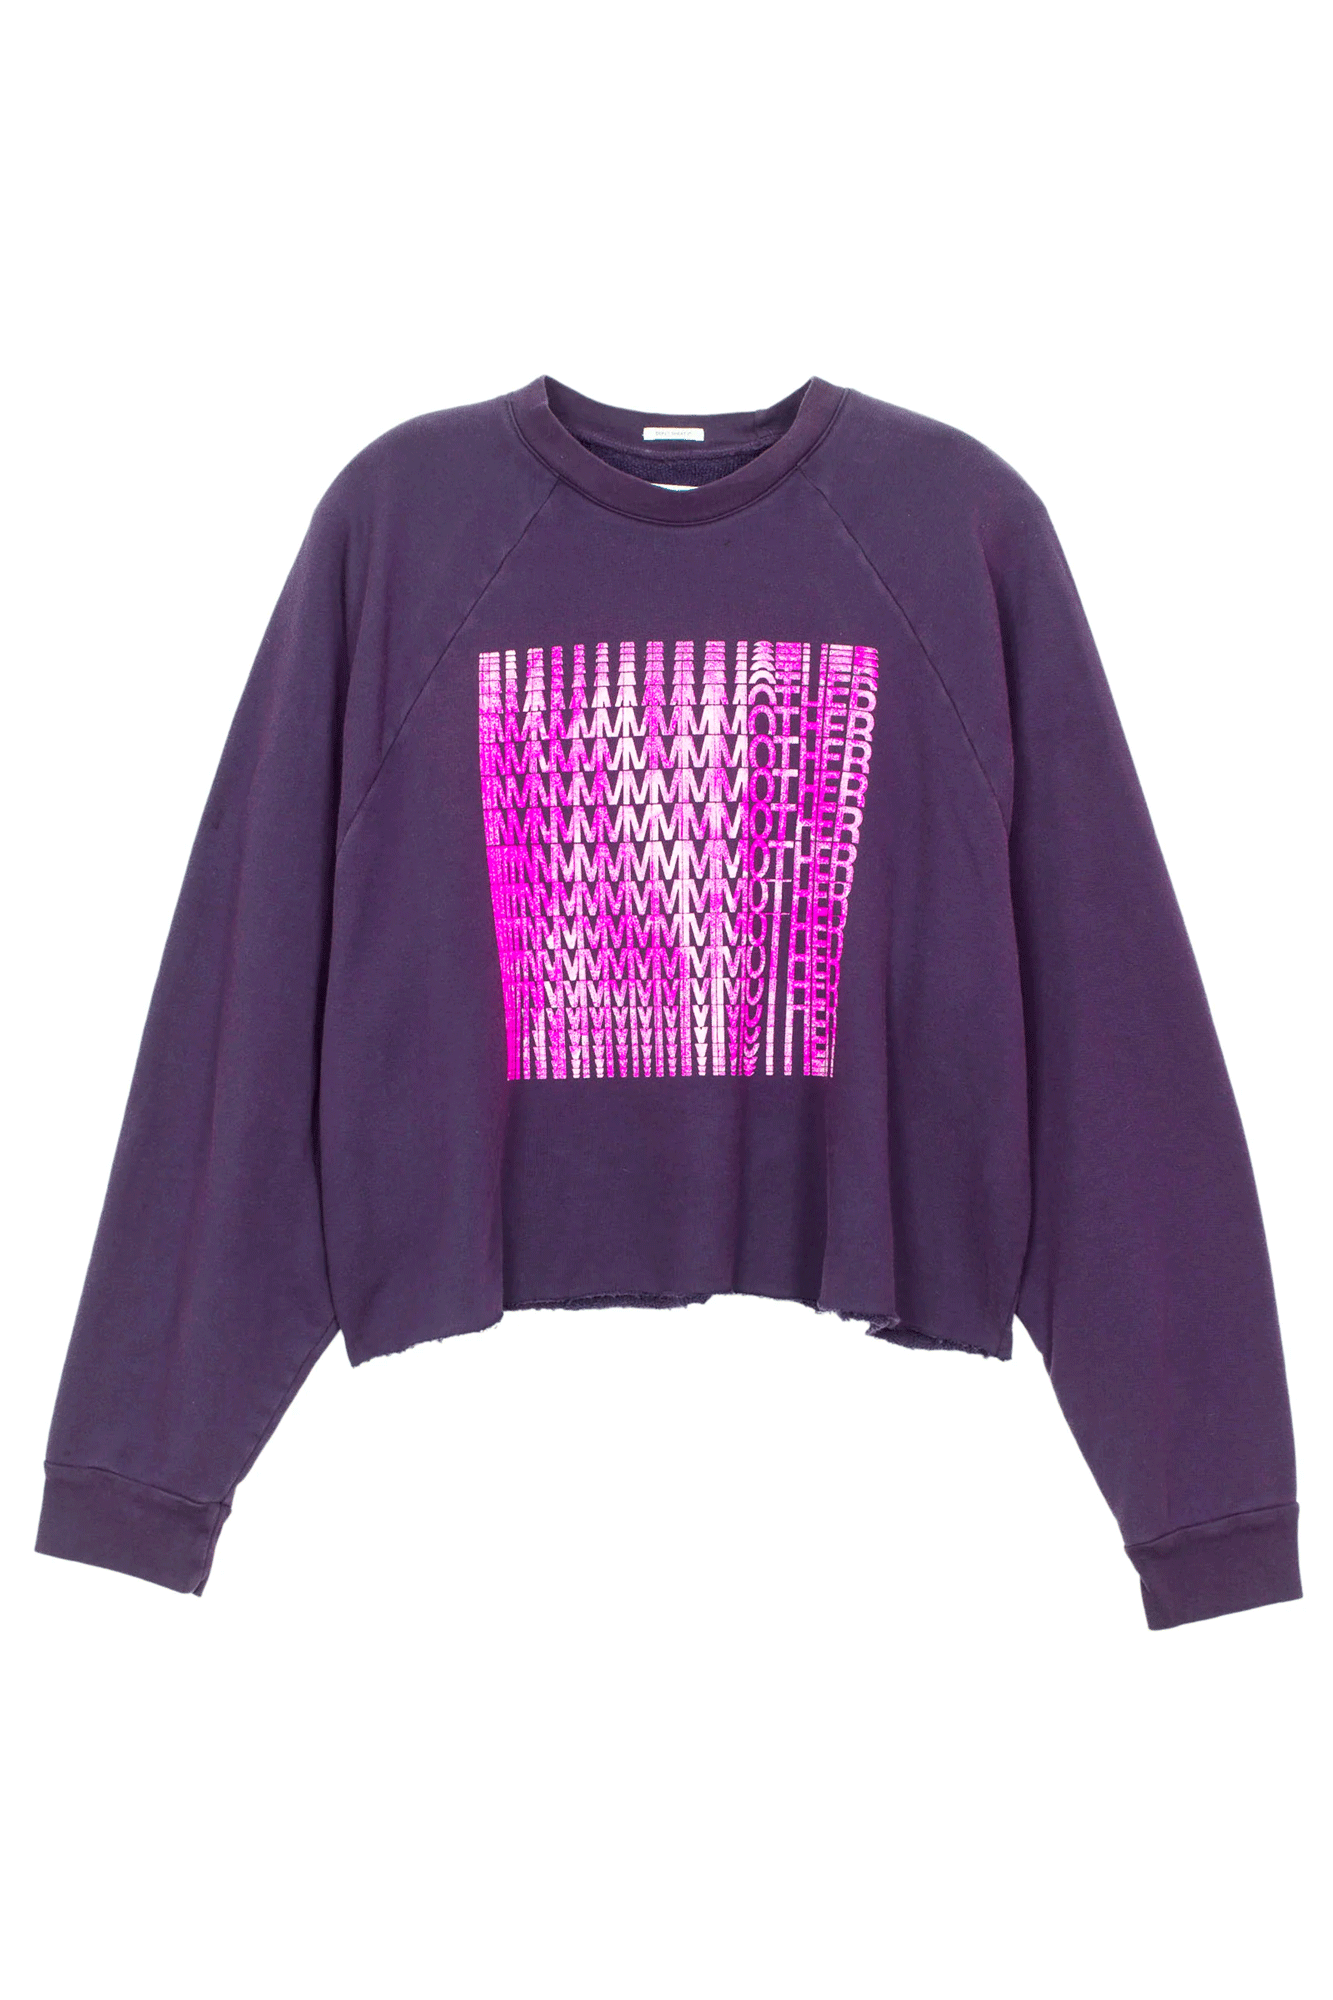 This limited edition Boost crop cut off sweatshirt from Mother is the perfect blend of style and comfort. Its 100% cotton construction is designed to last, while the drop shoulder and raw hem provide an effortlessly cool look. Enhanced with a unique glitchy text graphic in pink with a foiled finish, this piece is sure to turn heads.